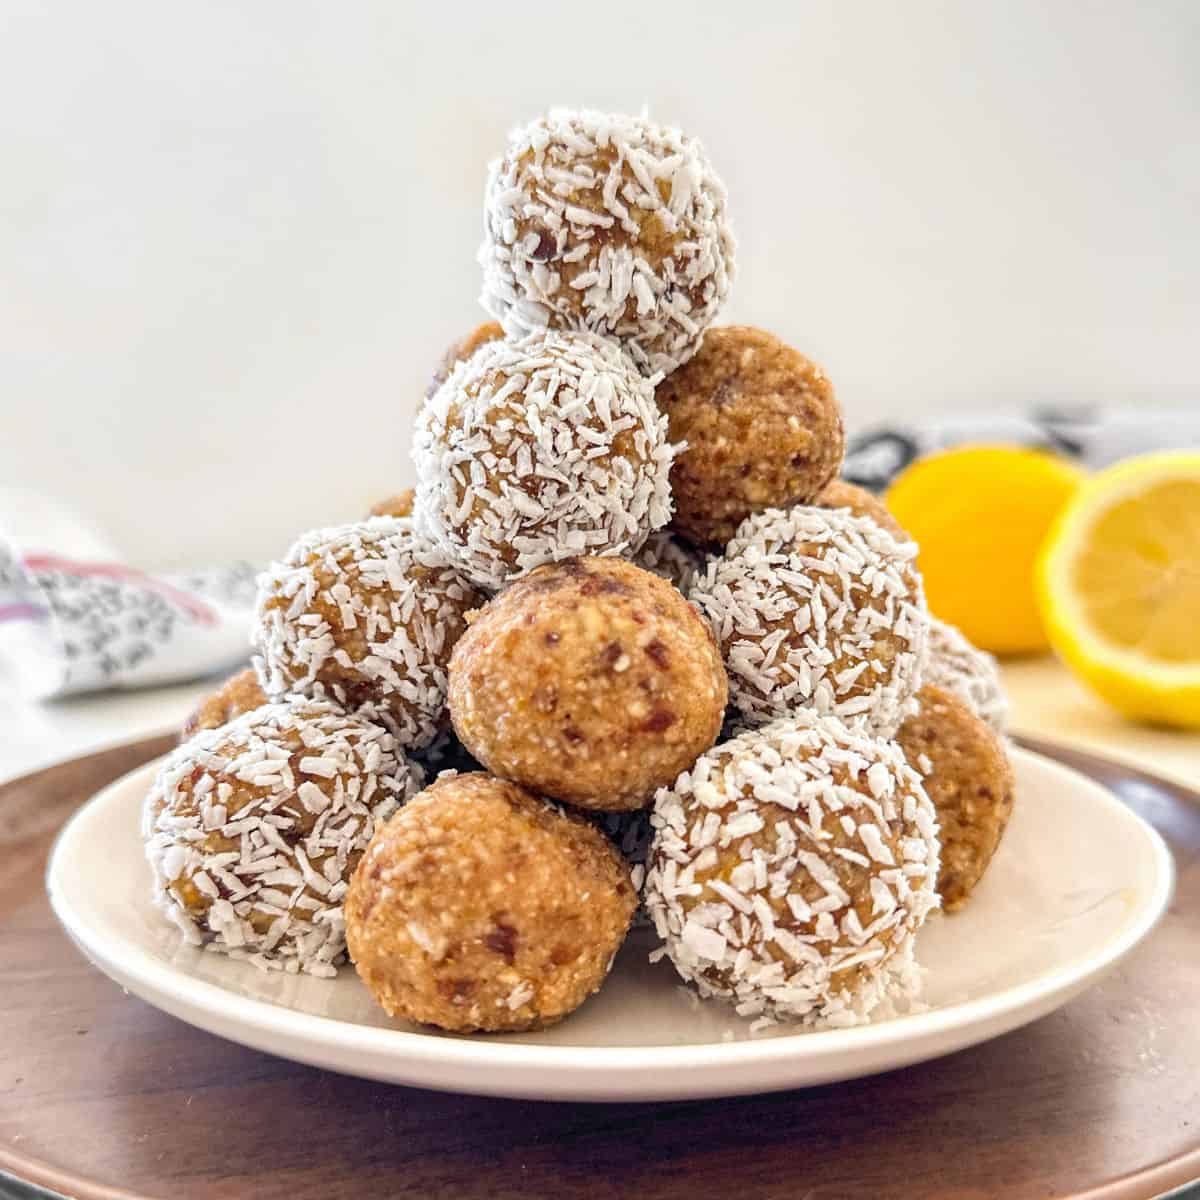 Lemon bliss balls stacked in a pyramid shape on white plate.